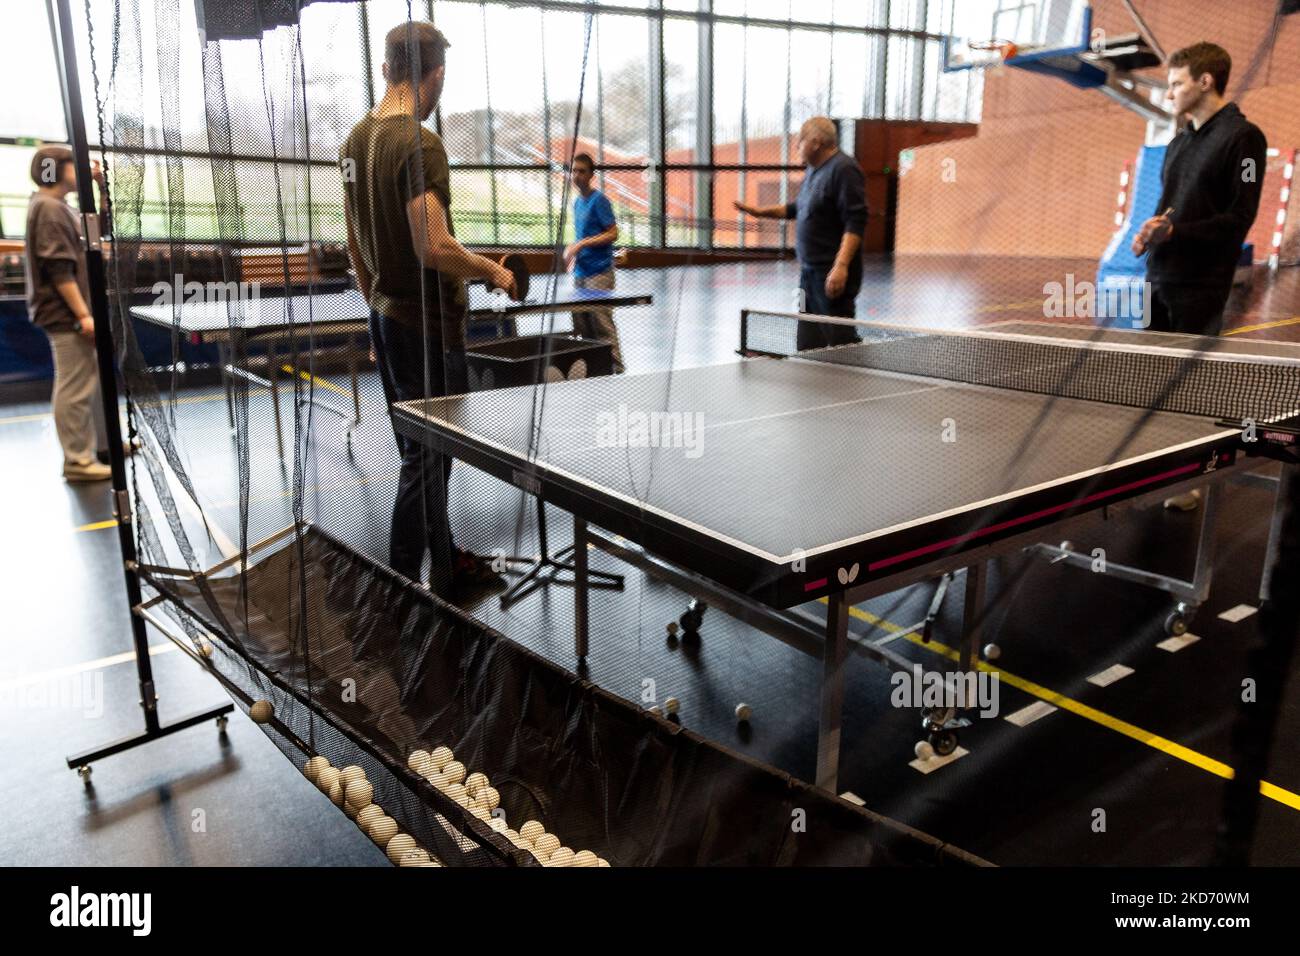 Ukrainian youth attend table tenis training run by a trainer Krzysztof in  KS Cracovia sports hall in Krakow, Poland on April 6, 2022 . The conflict  between Ukraine and Russia is expected